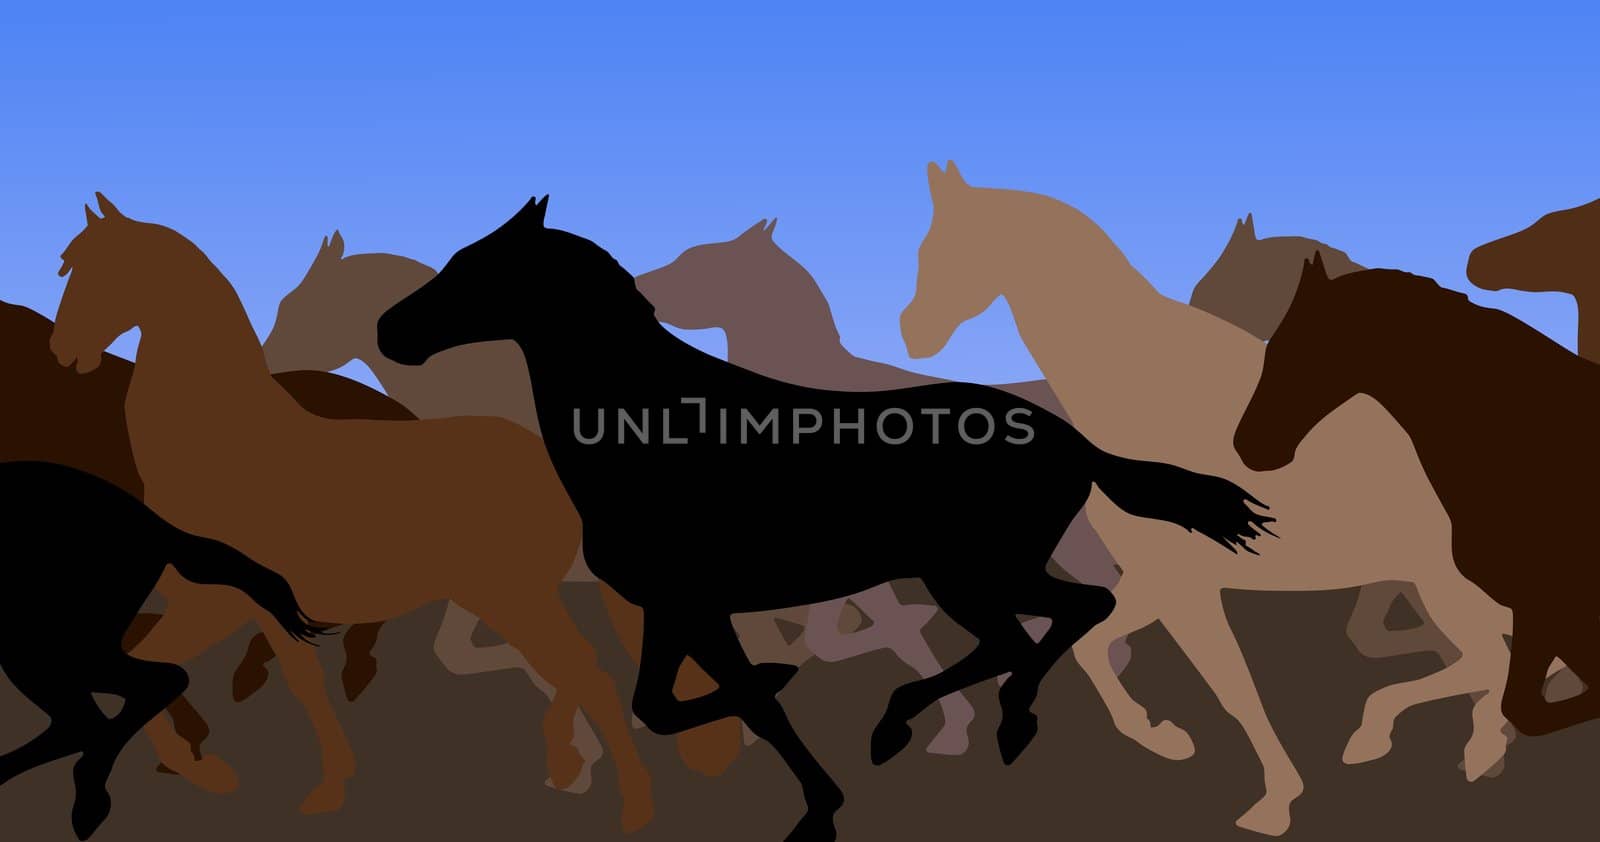 Illustration of a group of running horses